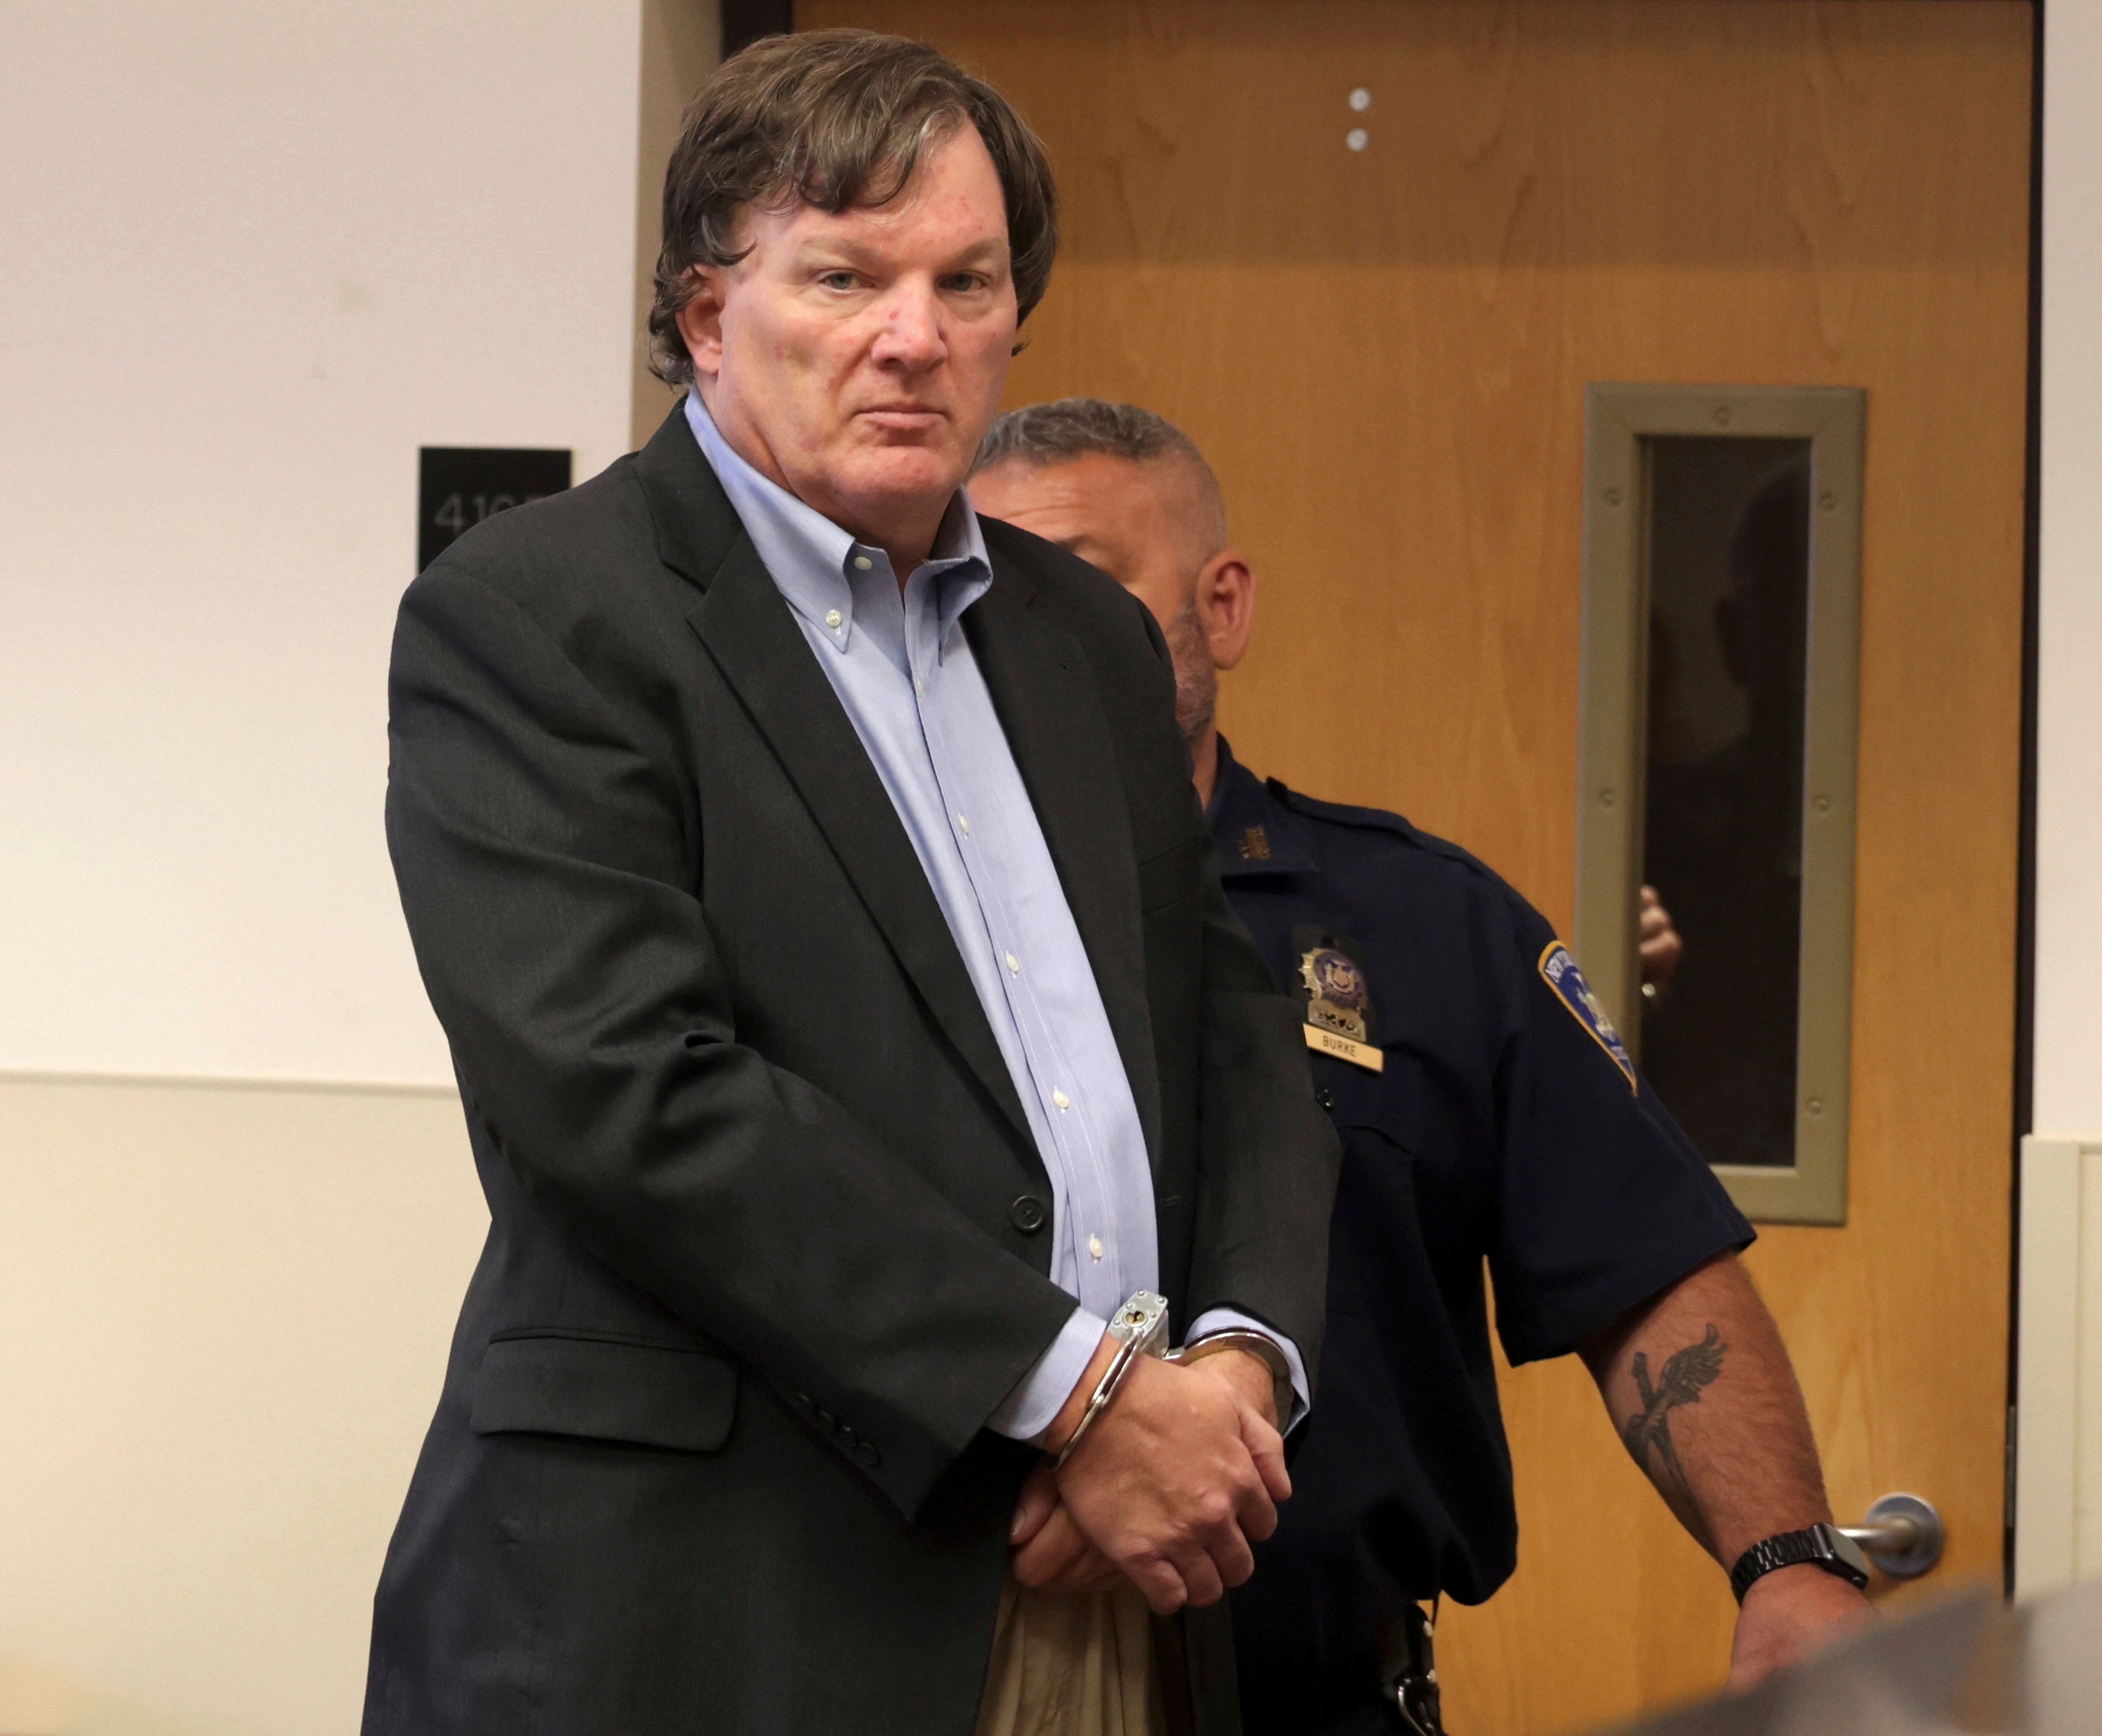 Rex A Heuermann, the architect accused of murdering at least three women near Long Island’s Gilgo Beach, appears before Judge Timothy P Mazzei in Suffolk County Court on Tuesday